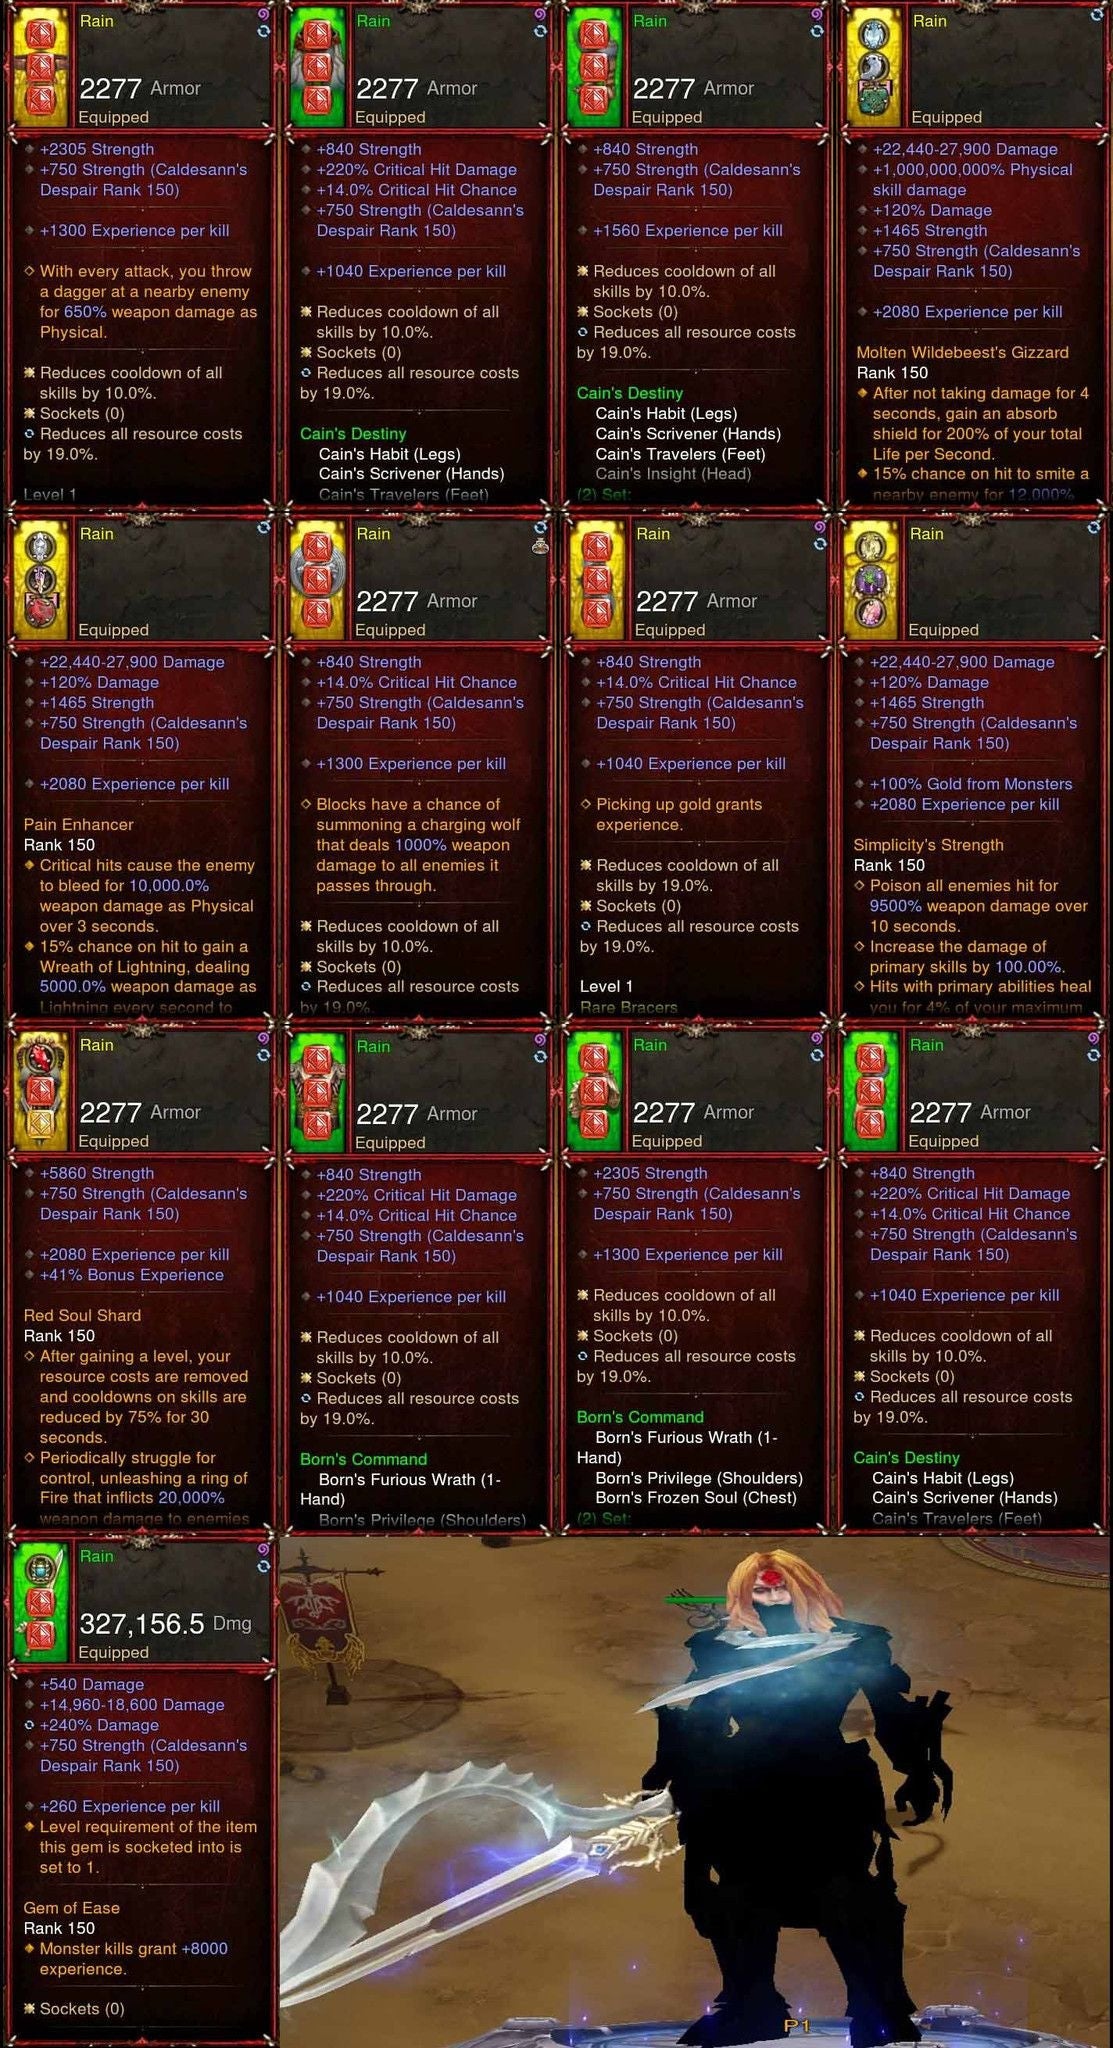 Seasonal [Primal Ancient] EXP Leveling Set for Leveling 1-70 (ward, air, rain) Diablo 3 Mods ROS Seasonal and Non Seasonal Save Mod - Modded Items and Gear - Hacks - Cheats - Trainers for Playstation 4 - Playstation 5 - Nintendo Switch - Xbox One